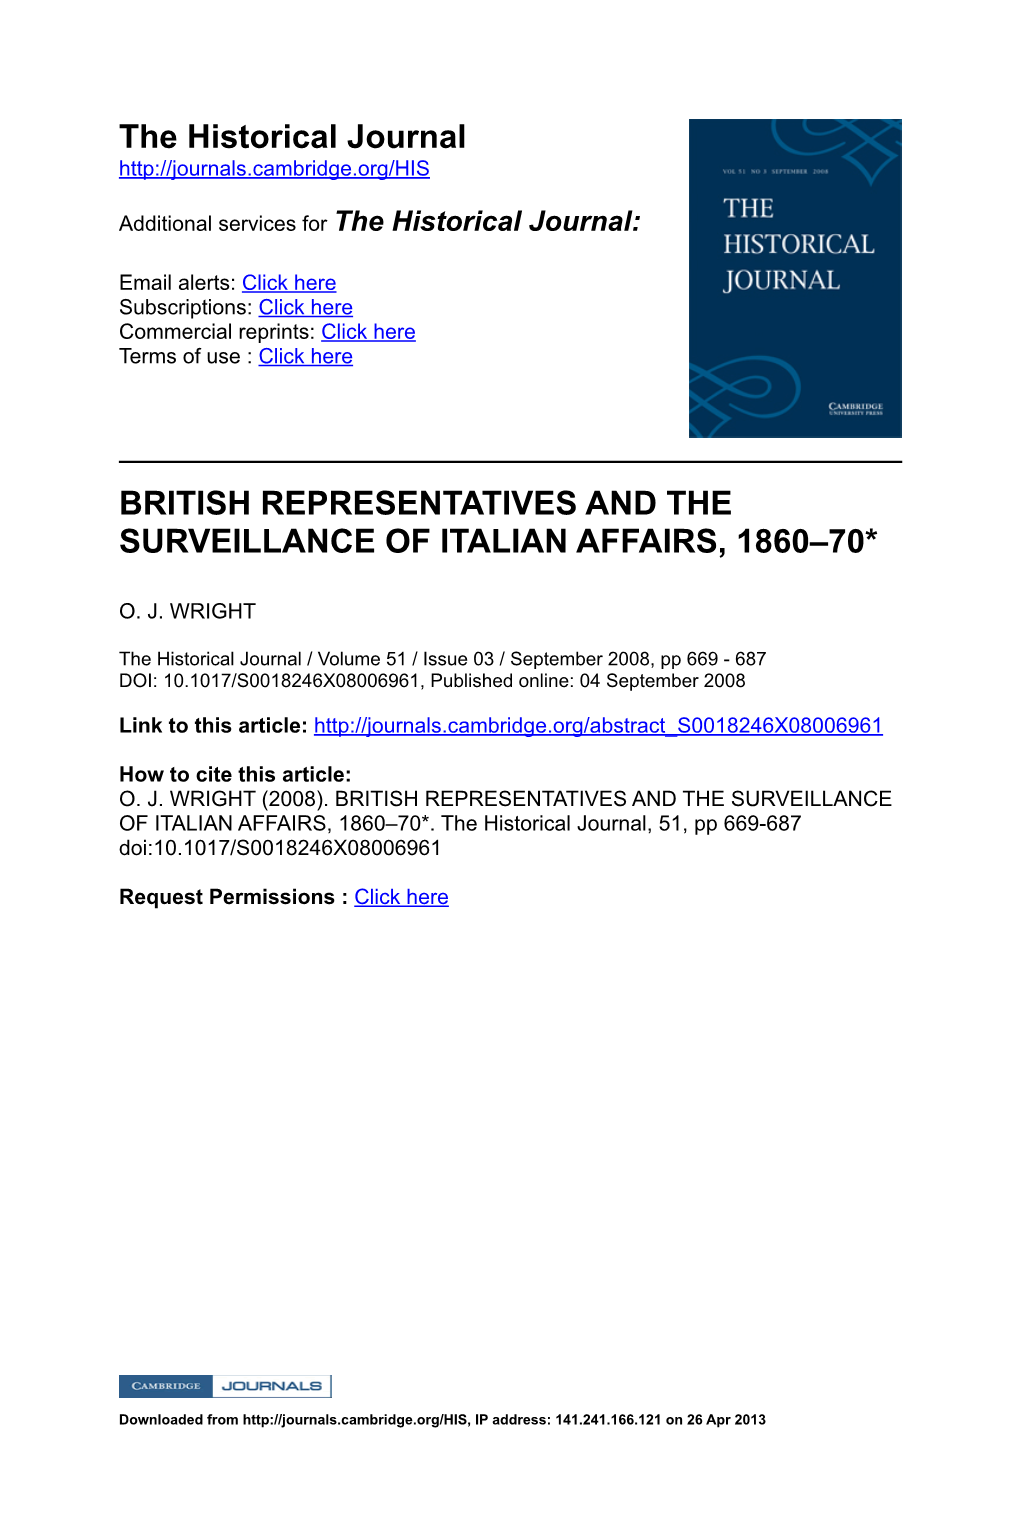 The Historical Journal BRITISH REPRESENTATIVES and THE